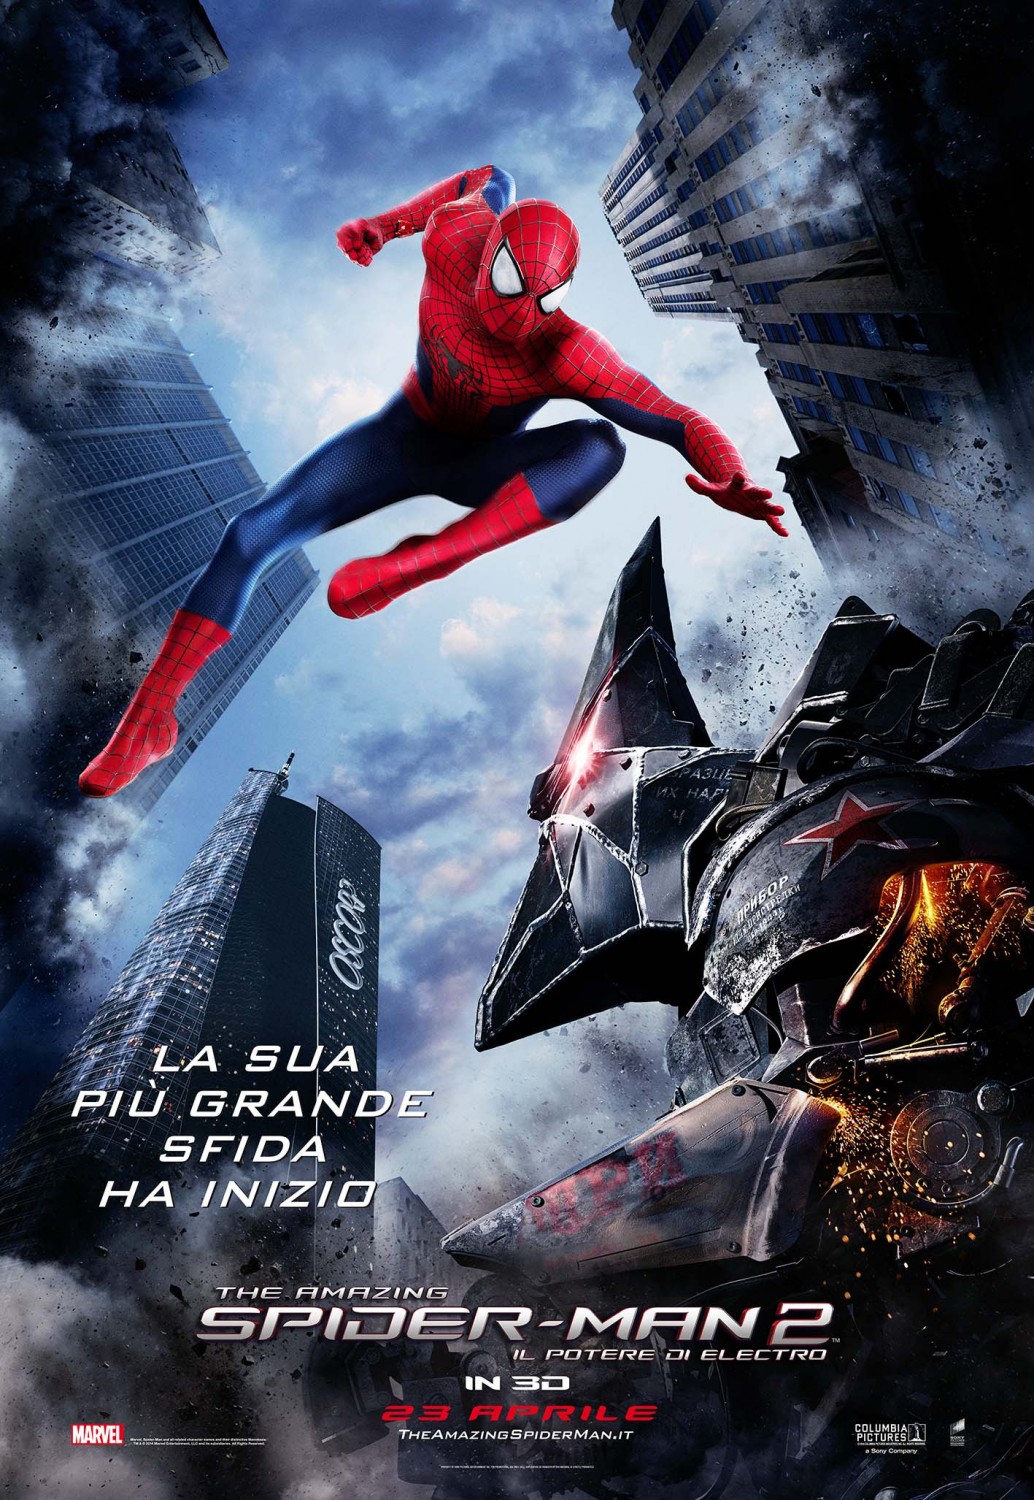 Extra Large Movie Poster Image for The Amazing Spider-Man 2 (#15 of 17)